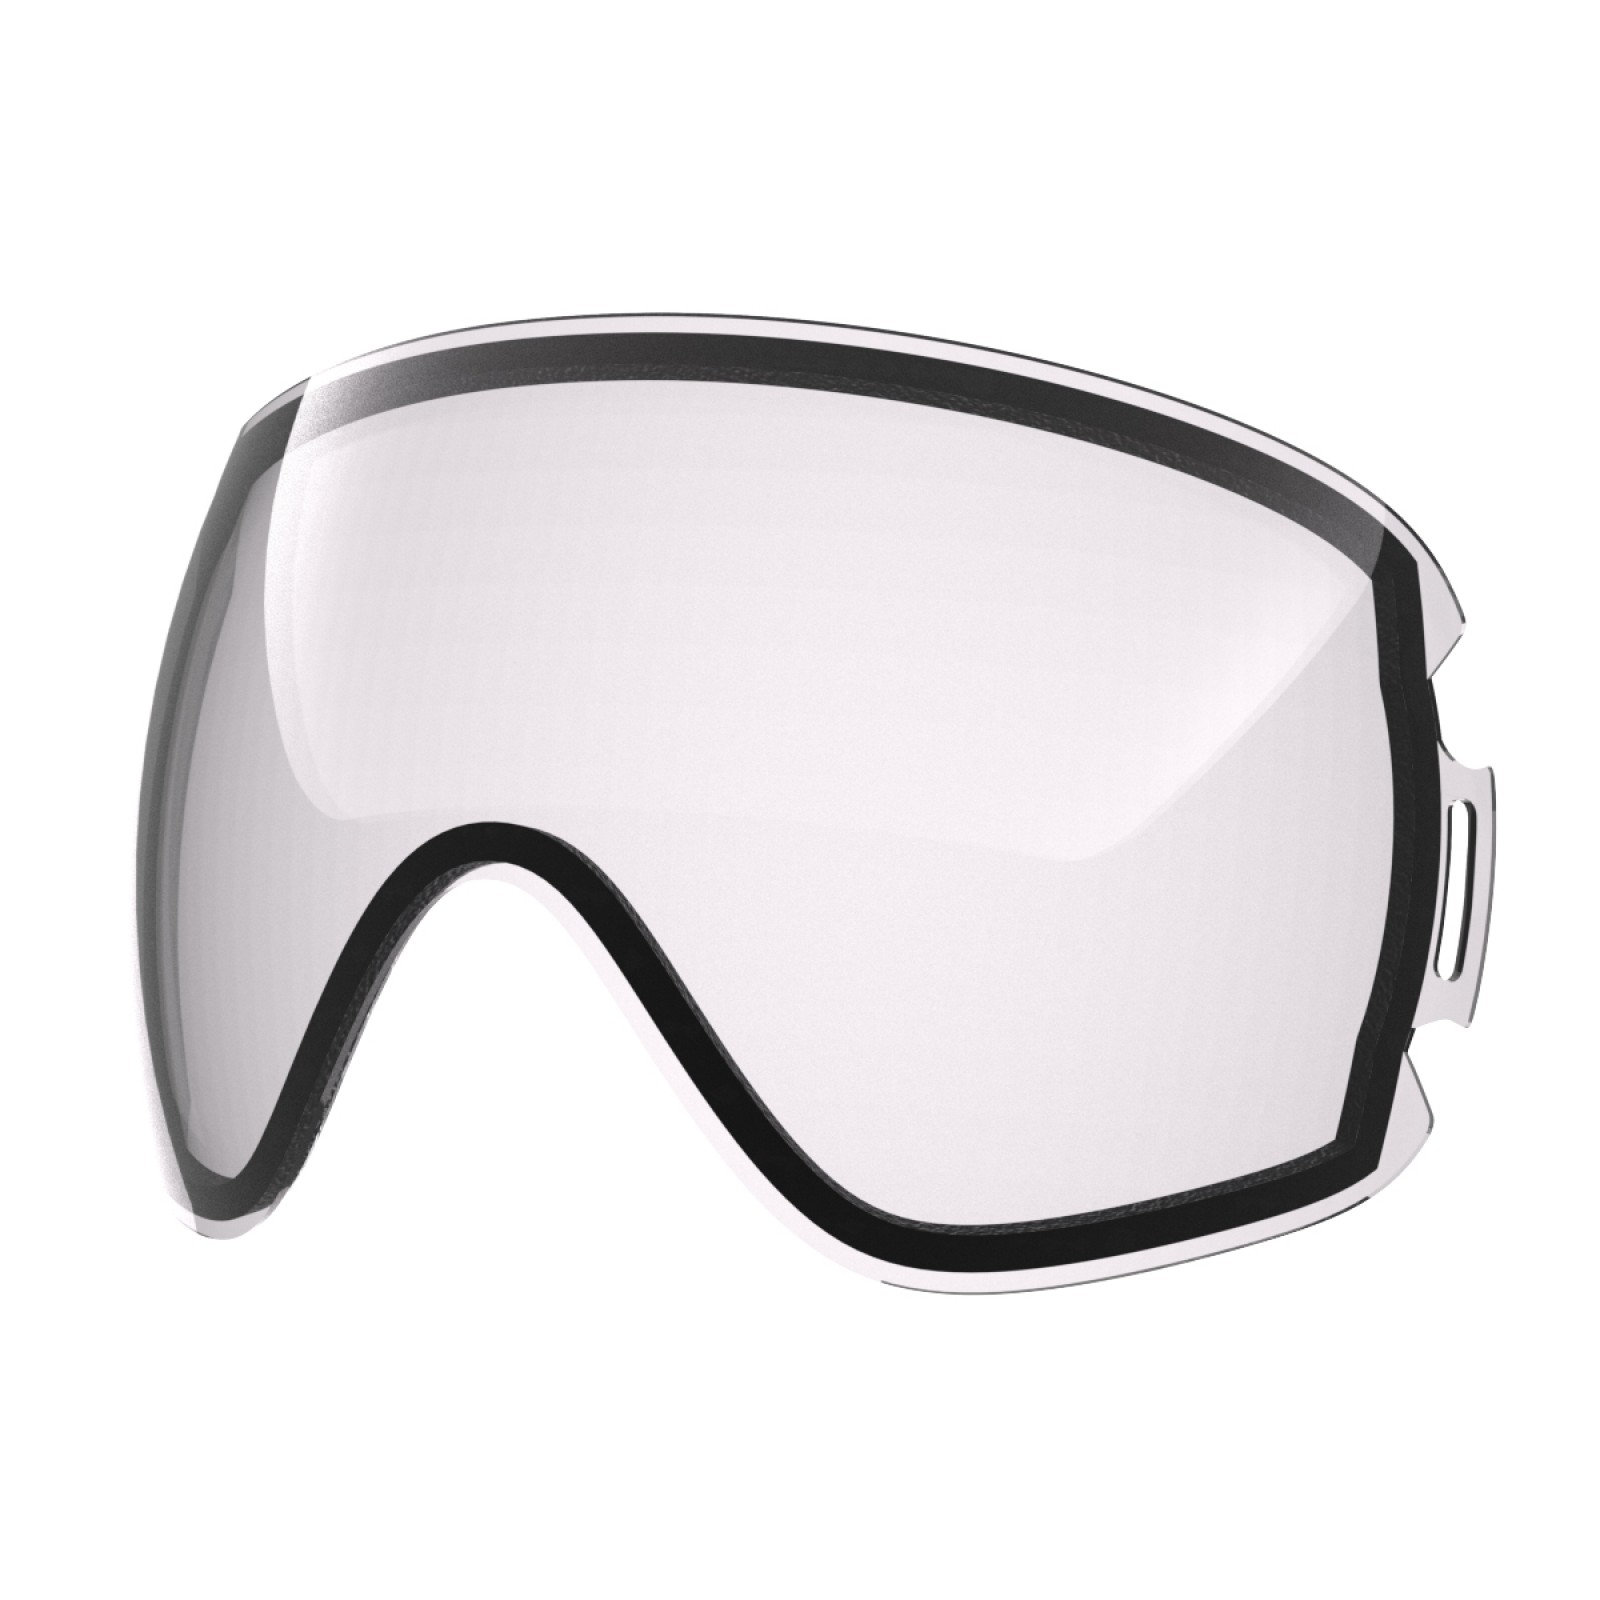 Clear lens for Open goggle